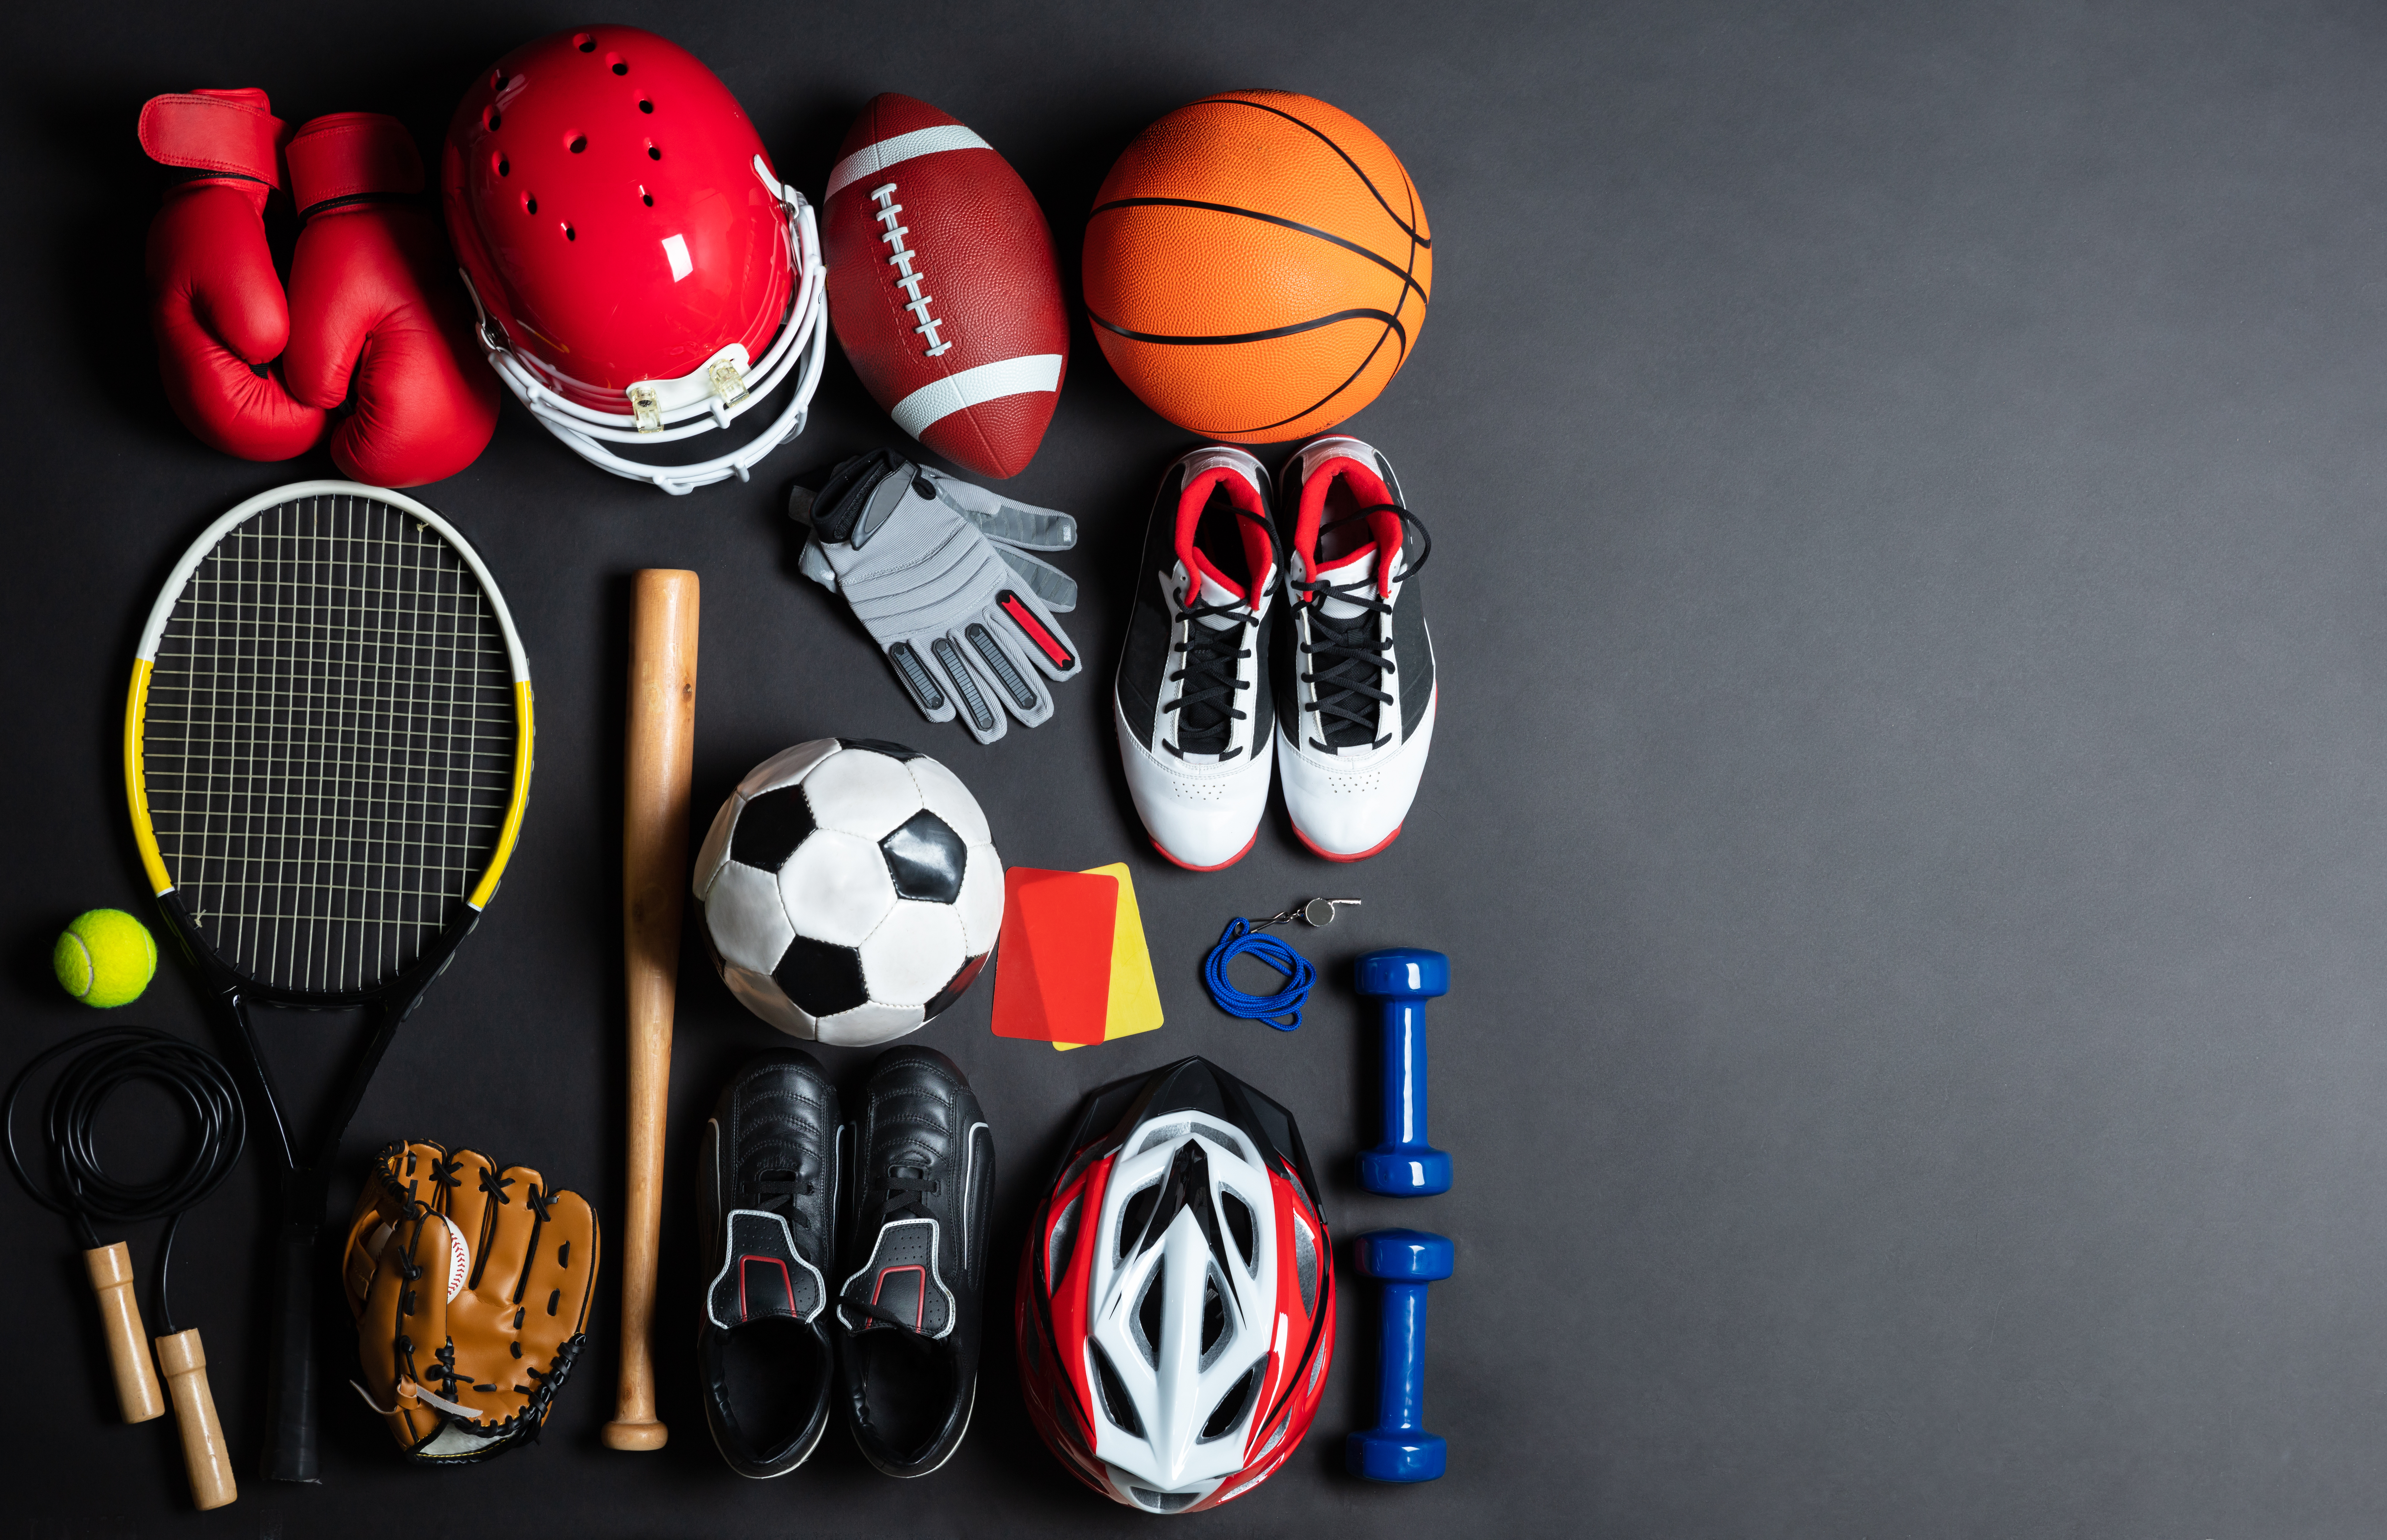 4 Tips For Finding The Best Sports Accessories For Better Gameplay